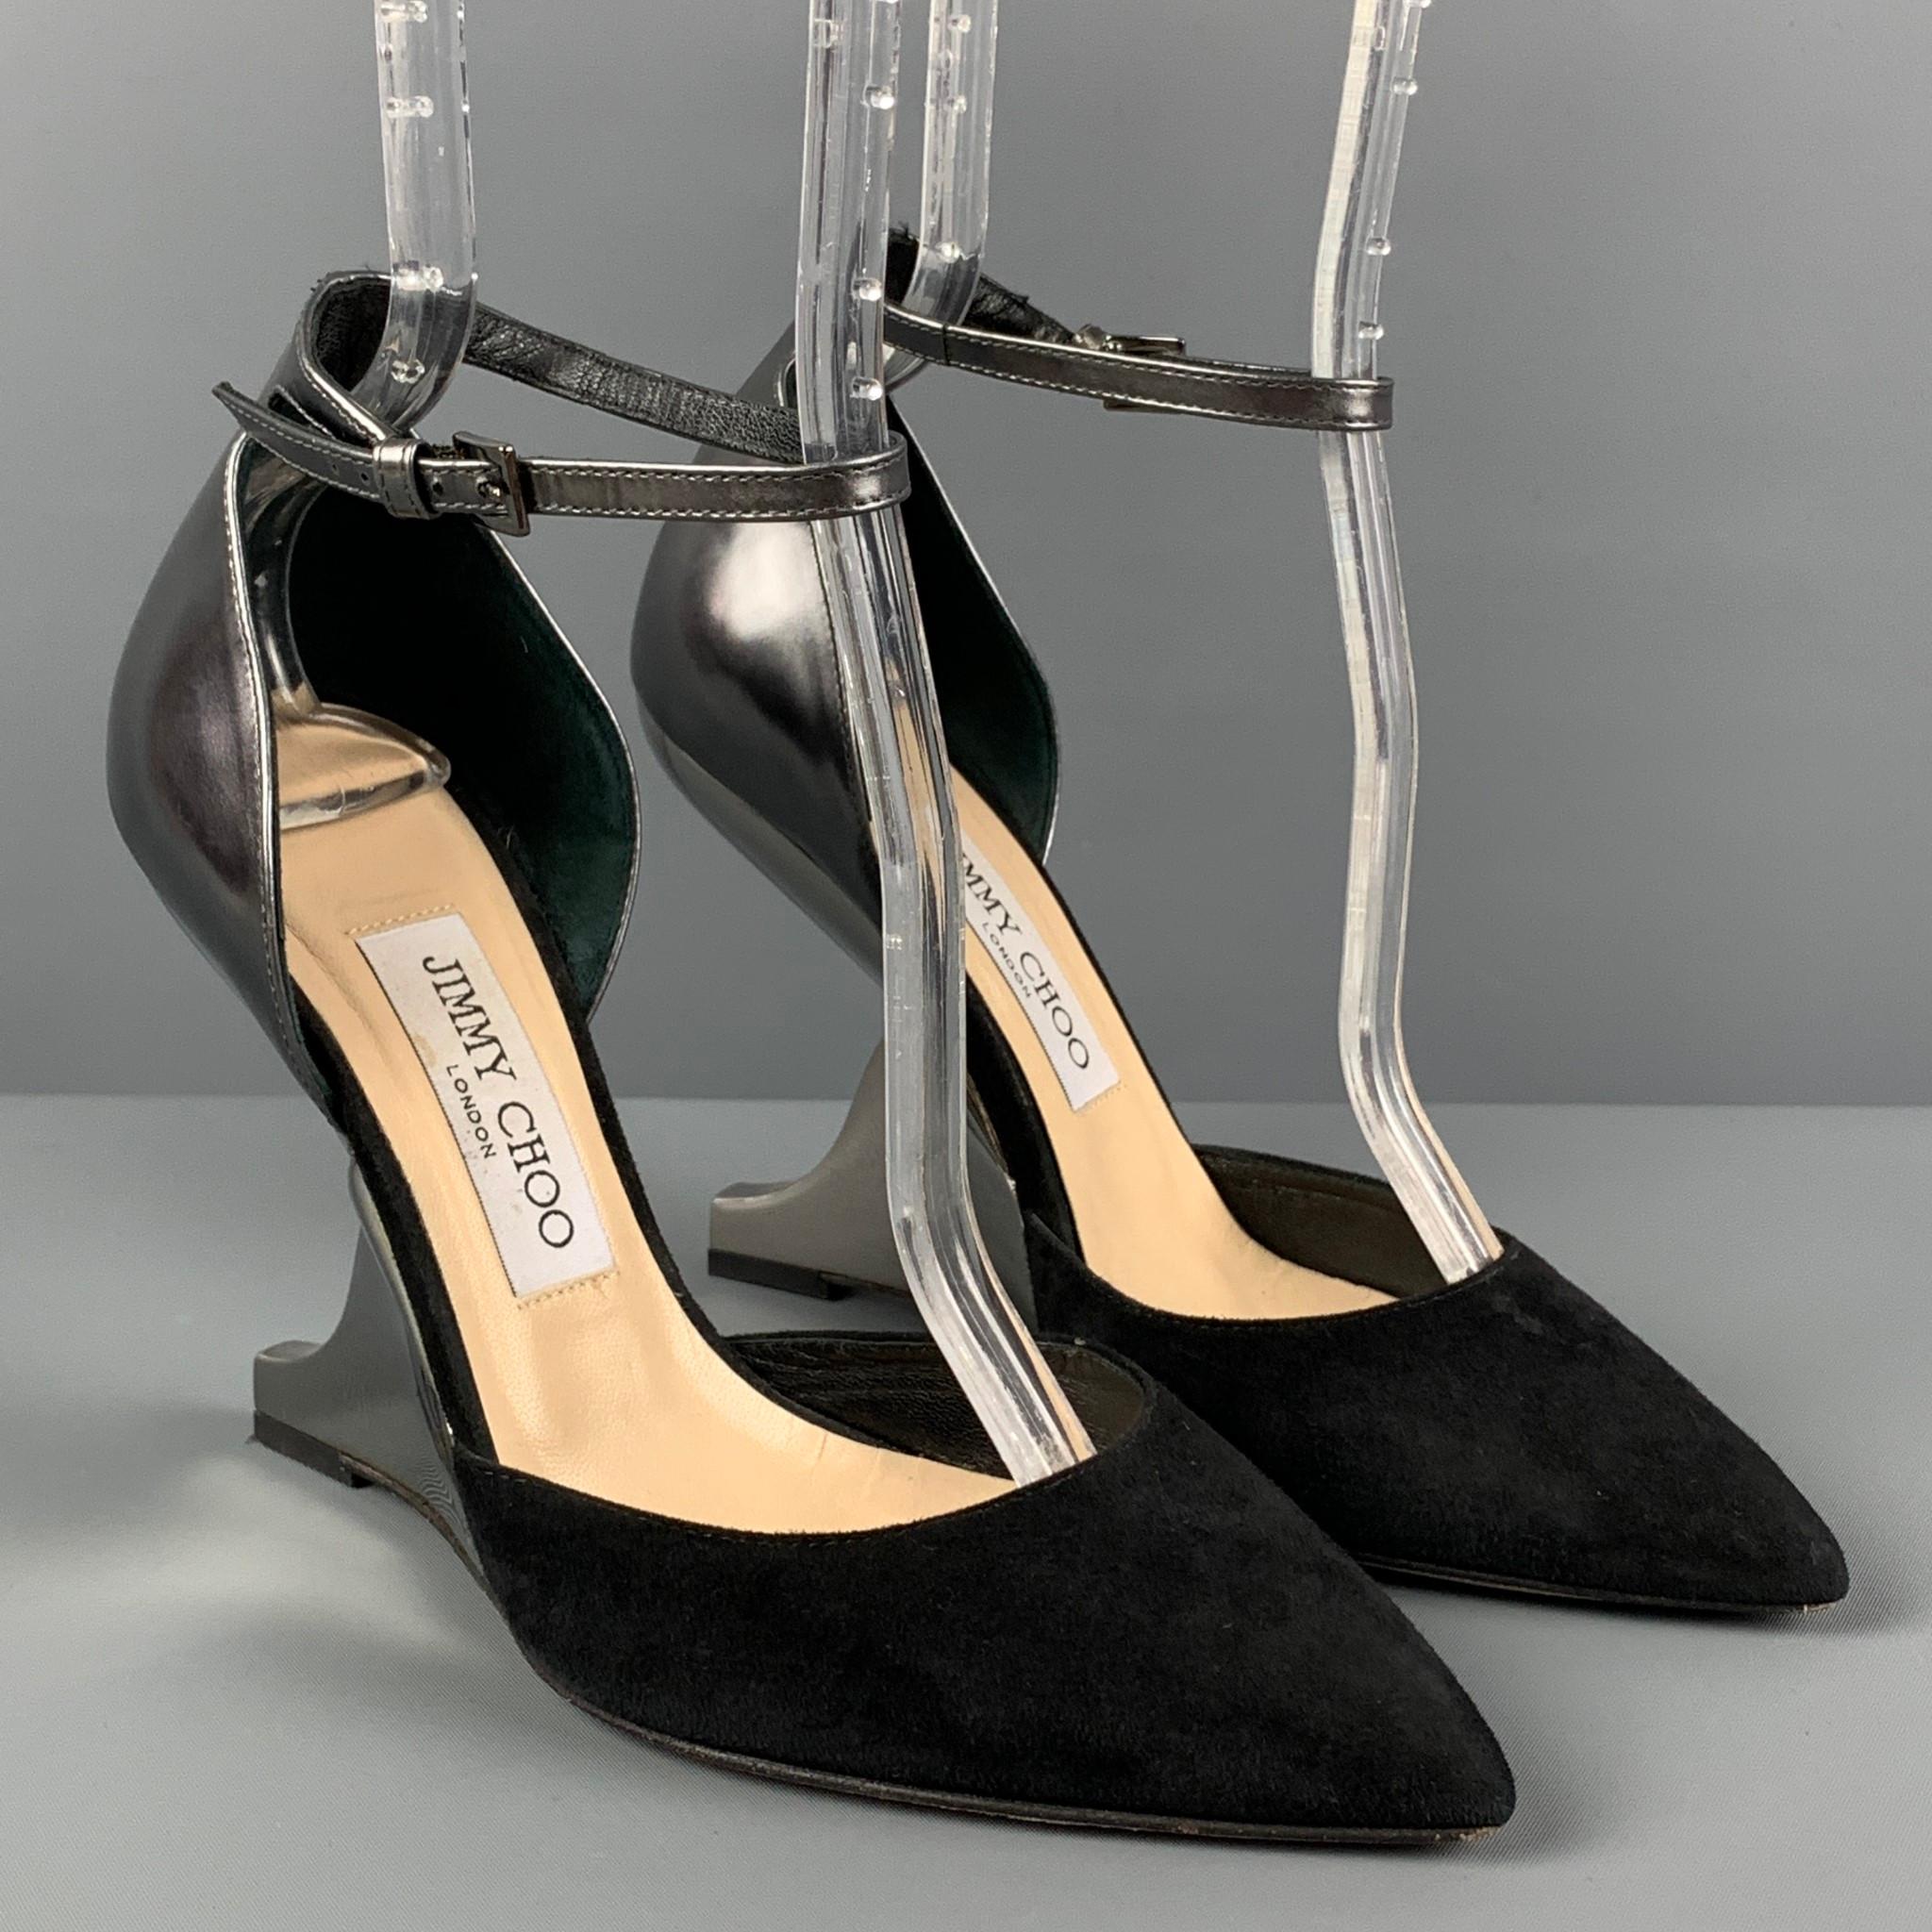 JIMMY CHOO pumps comes in a black suede with a silver leather panel featuring a pointed toe, ankle strap, and a curved mirrored heel. Made in Italy. 

Very Good Pre-Owned Condition.
Marked: 37.5
Original Retail Price: $850.00

Measurements:

Heel: